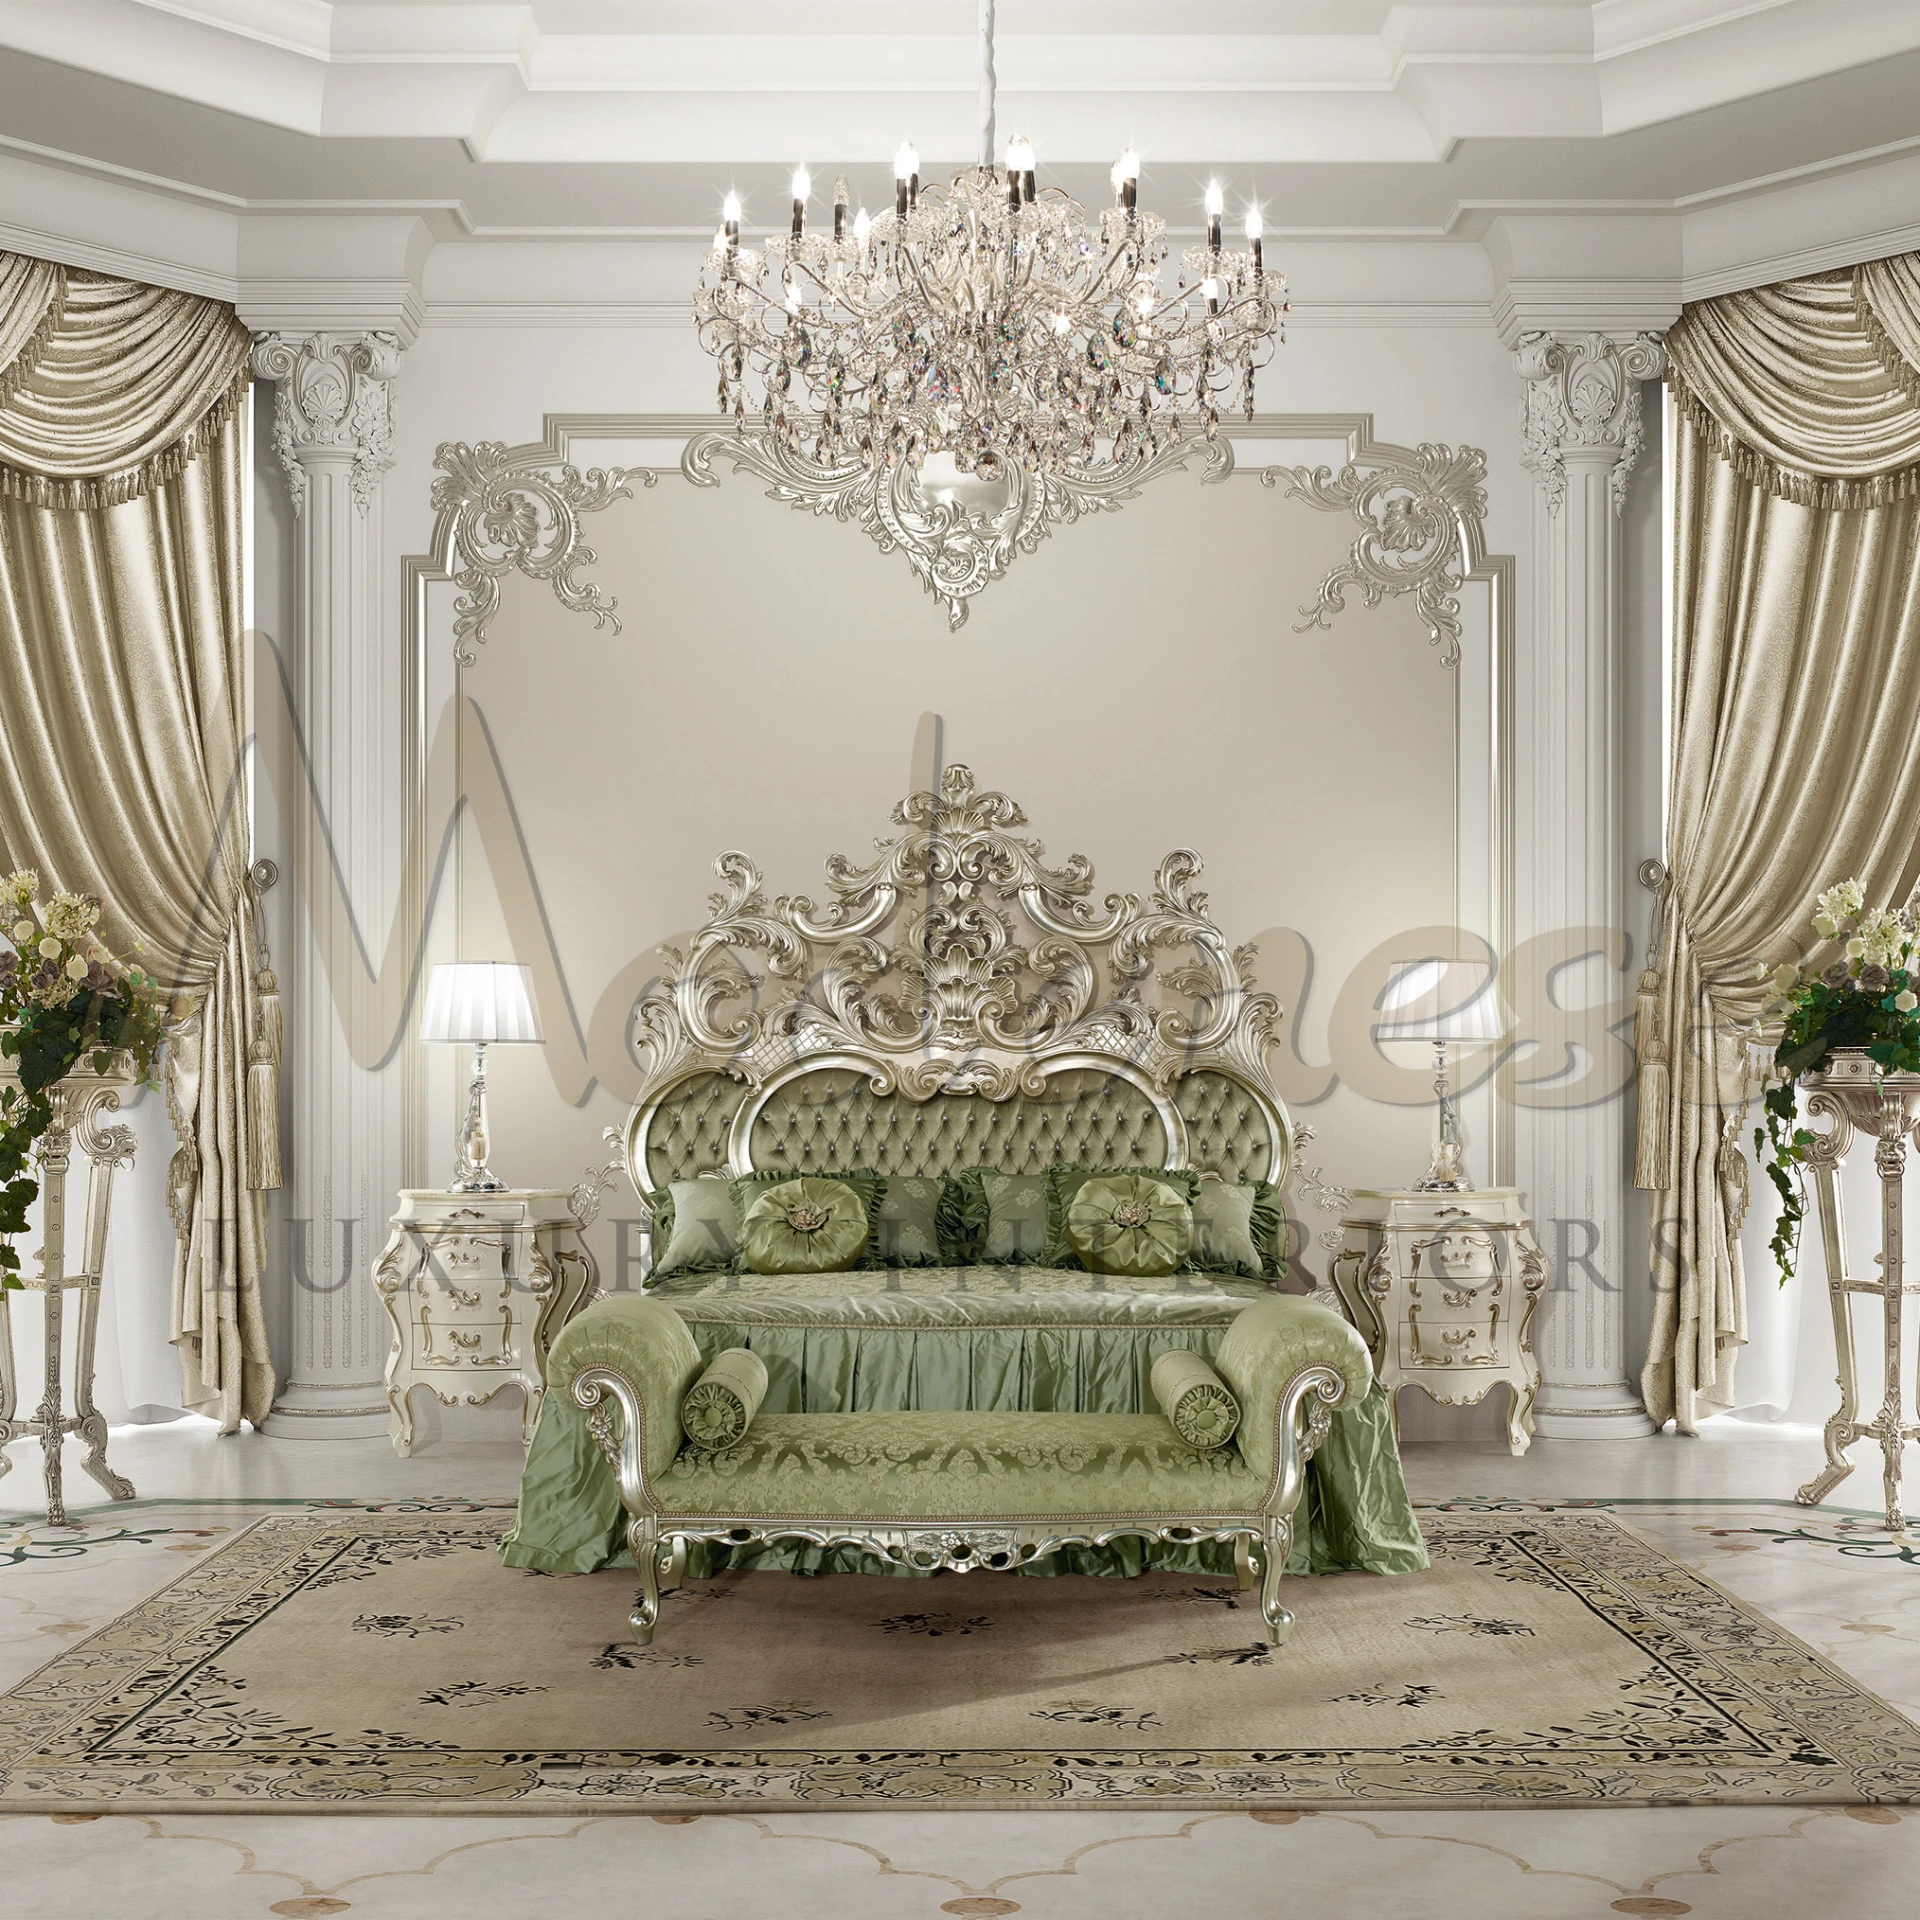 Regal bedroom featuring an elaborate Modenese Furniture bed with gilded accents, plush green fabric, ornate side tables, and a dazzling chandelier overhead.